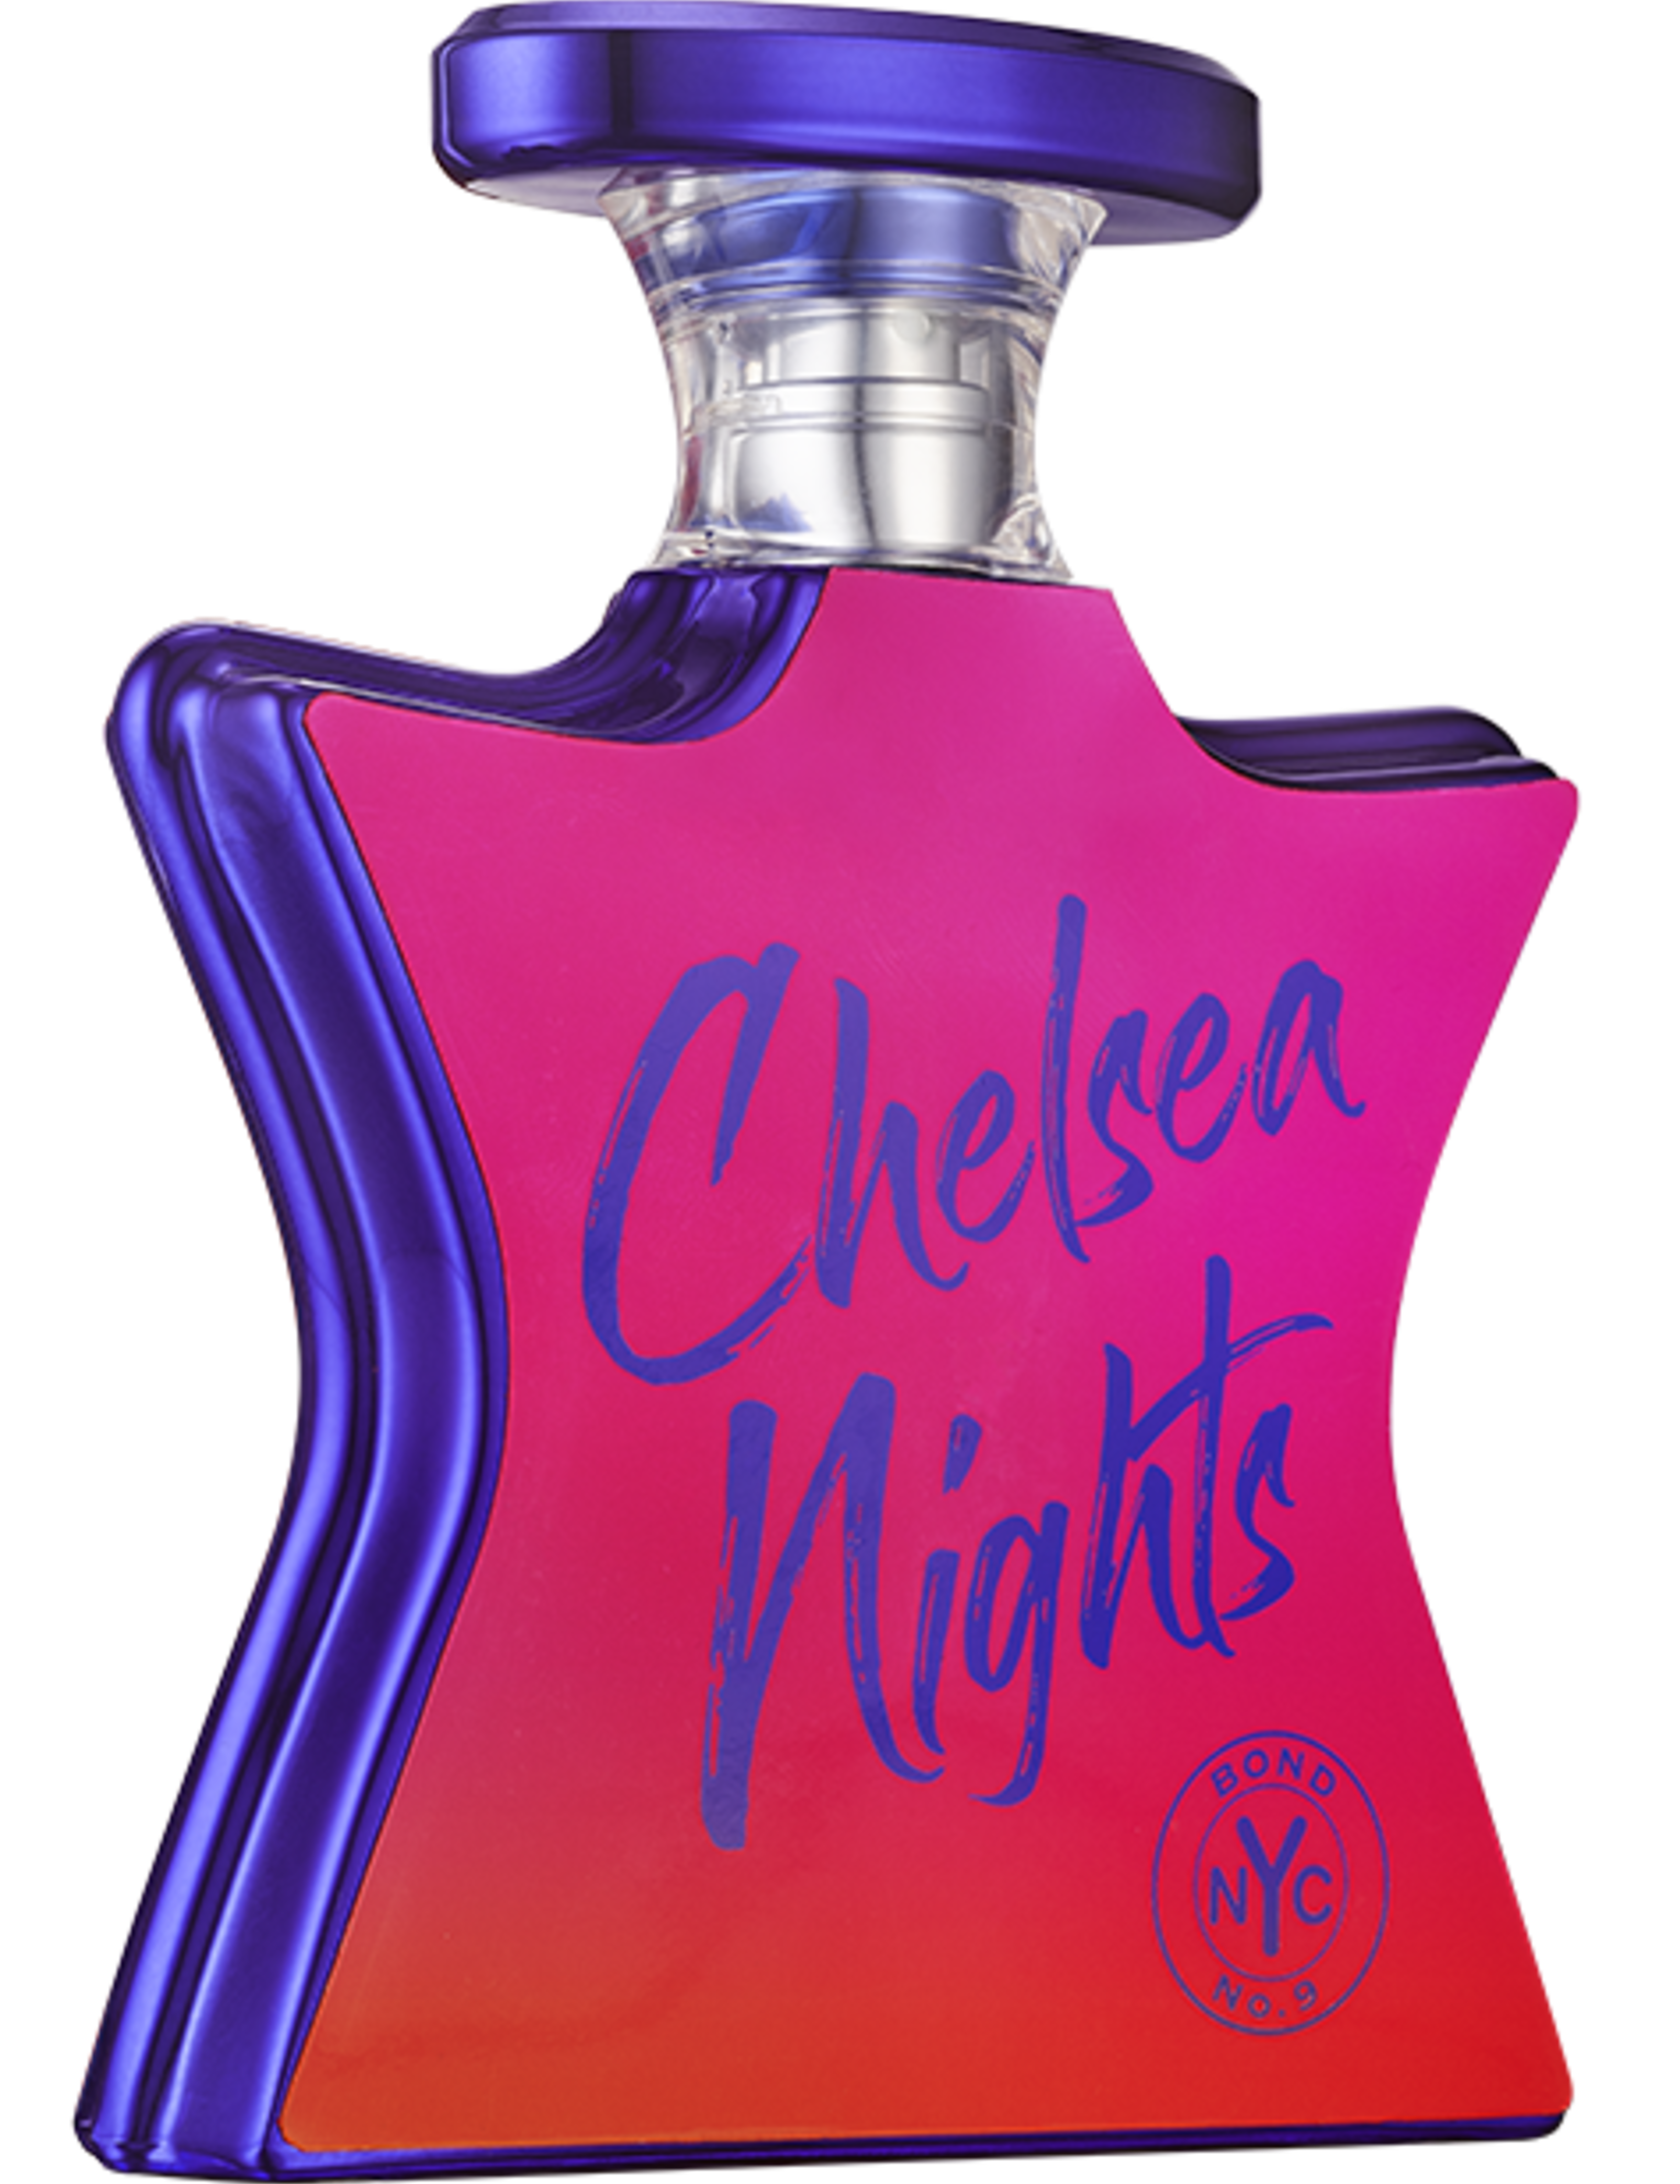 CHELSEA-NIGHTS__PRODUCT_01--IMG.png